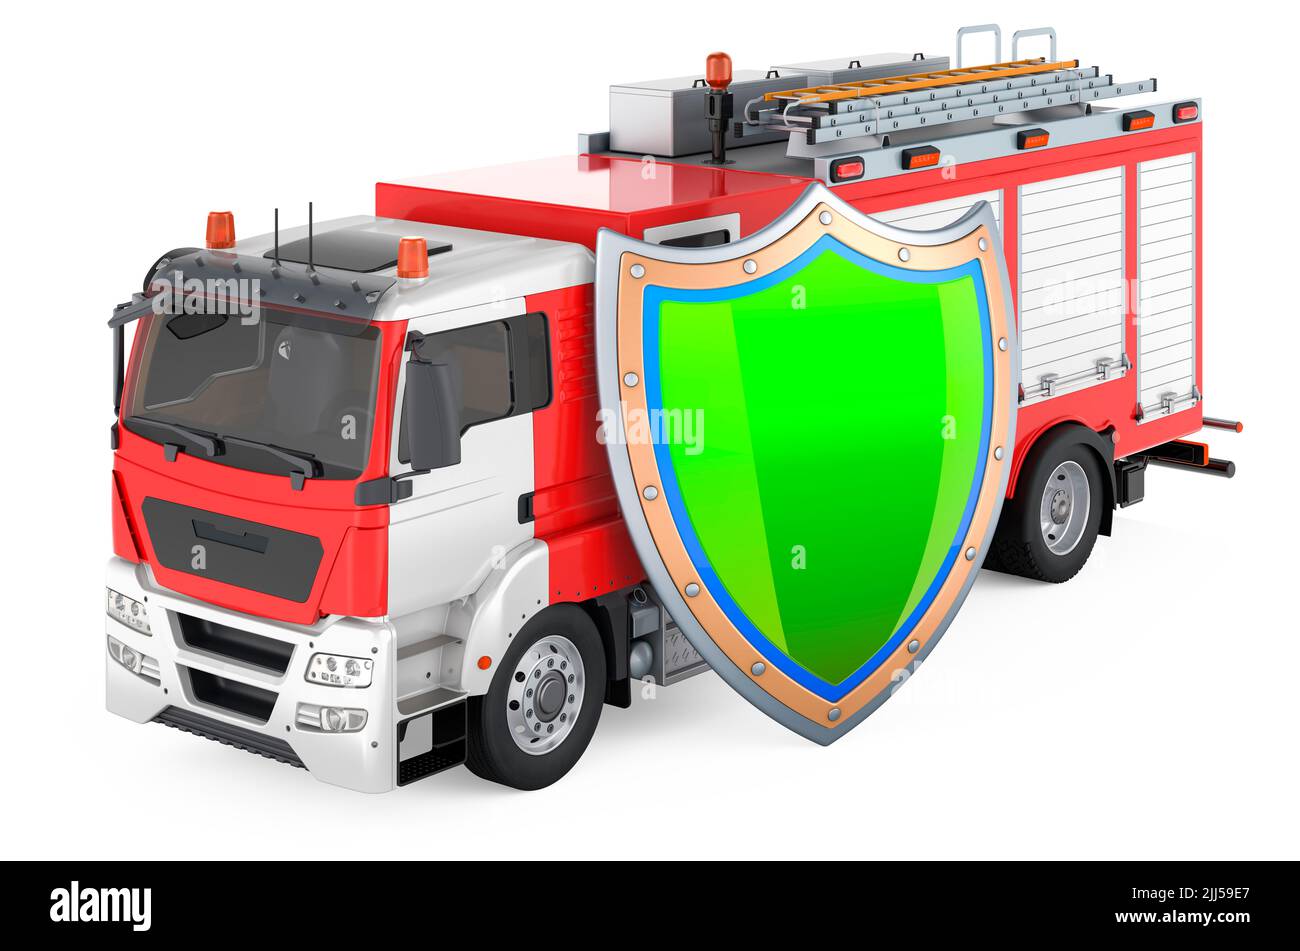 Fire truck with shield. 3D rendering isolated on white background Stock Photo